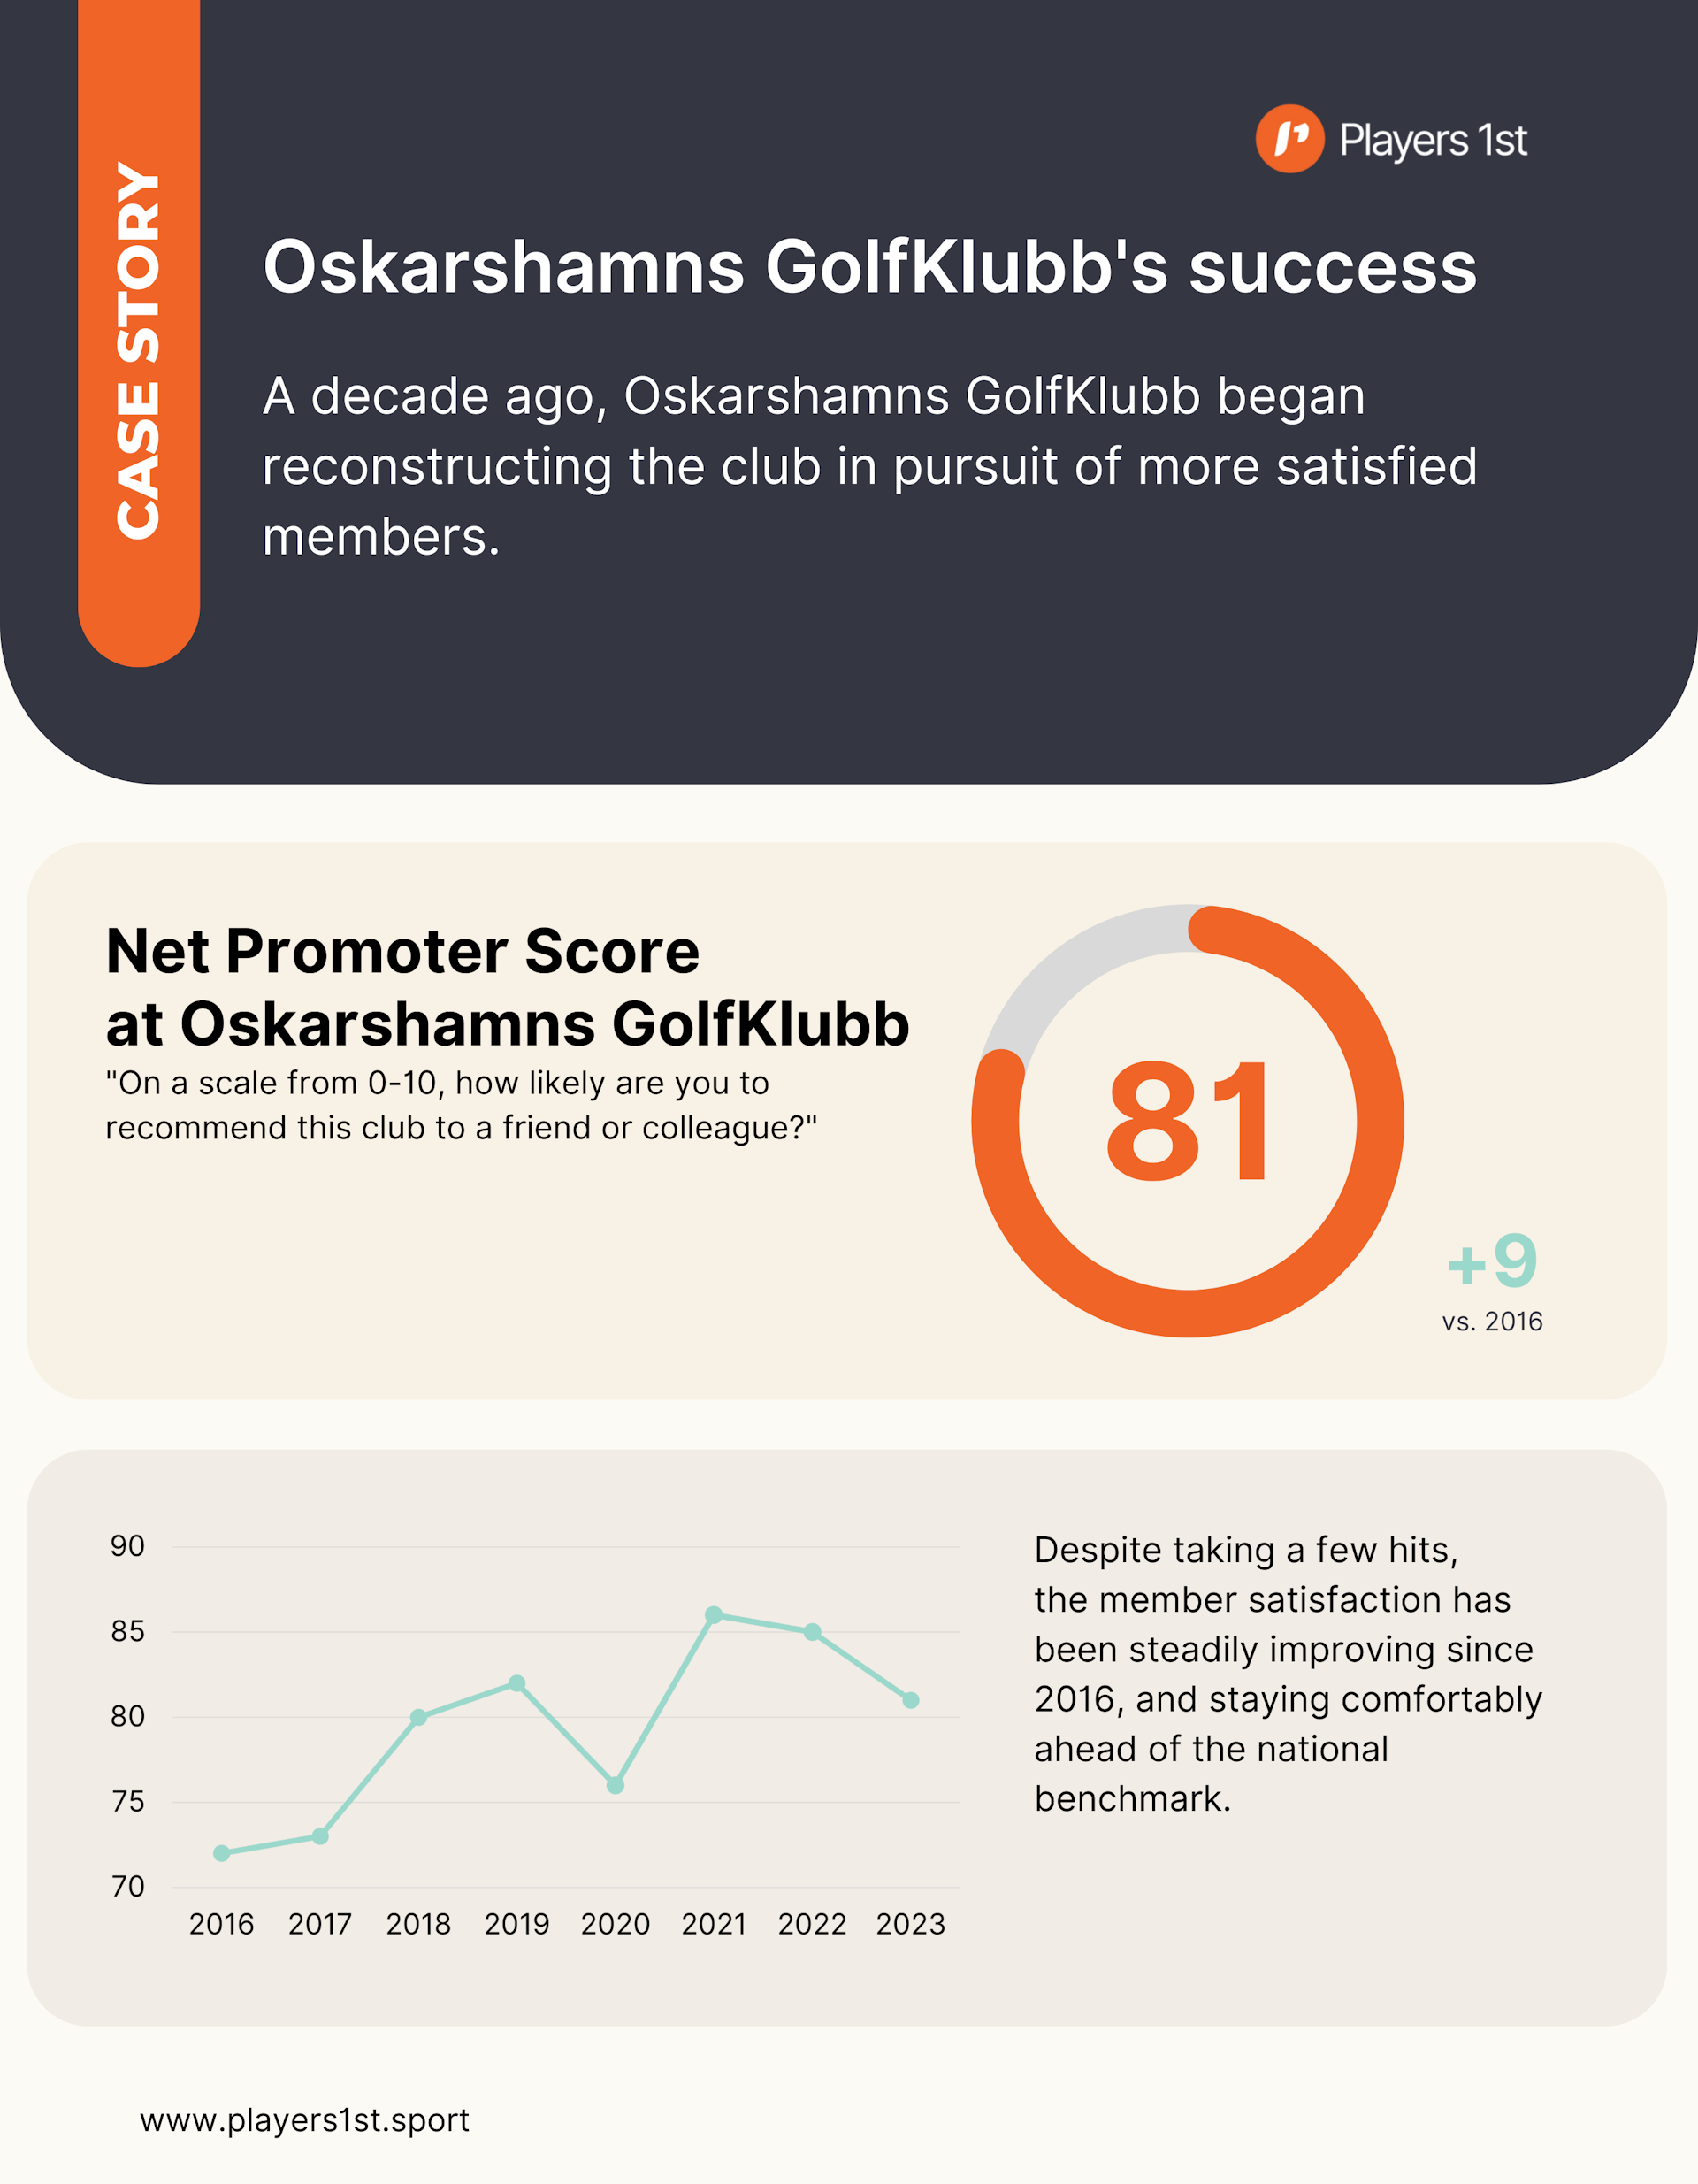 Oskarshamns GolfKlubb's success from 2016 to 2023. Source: Players 1st